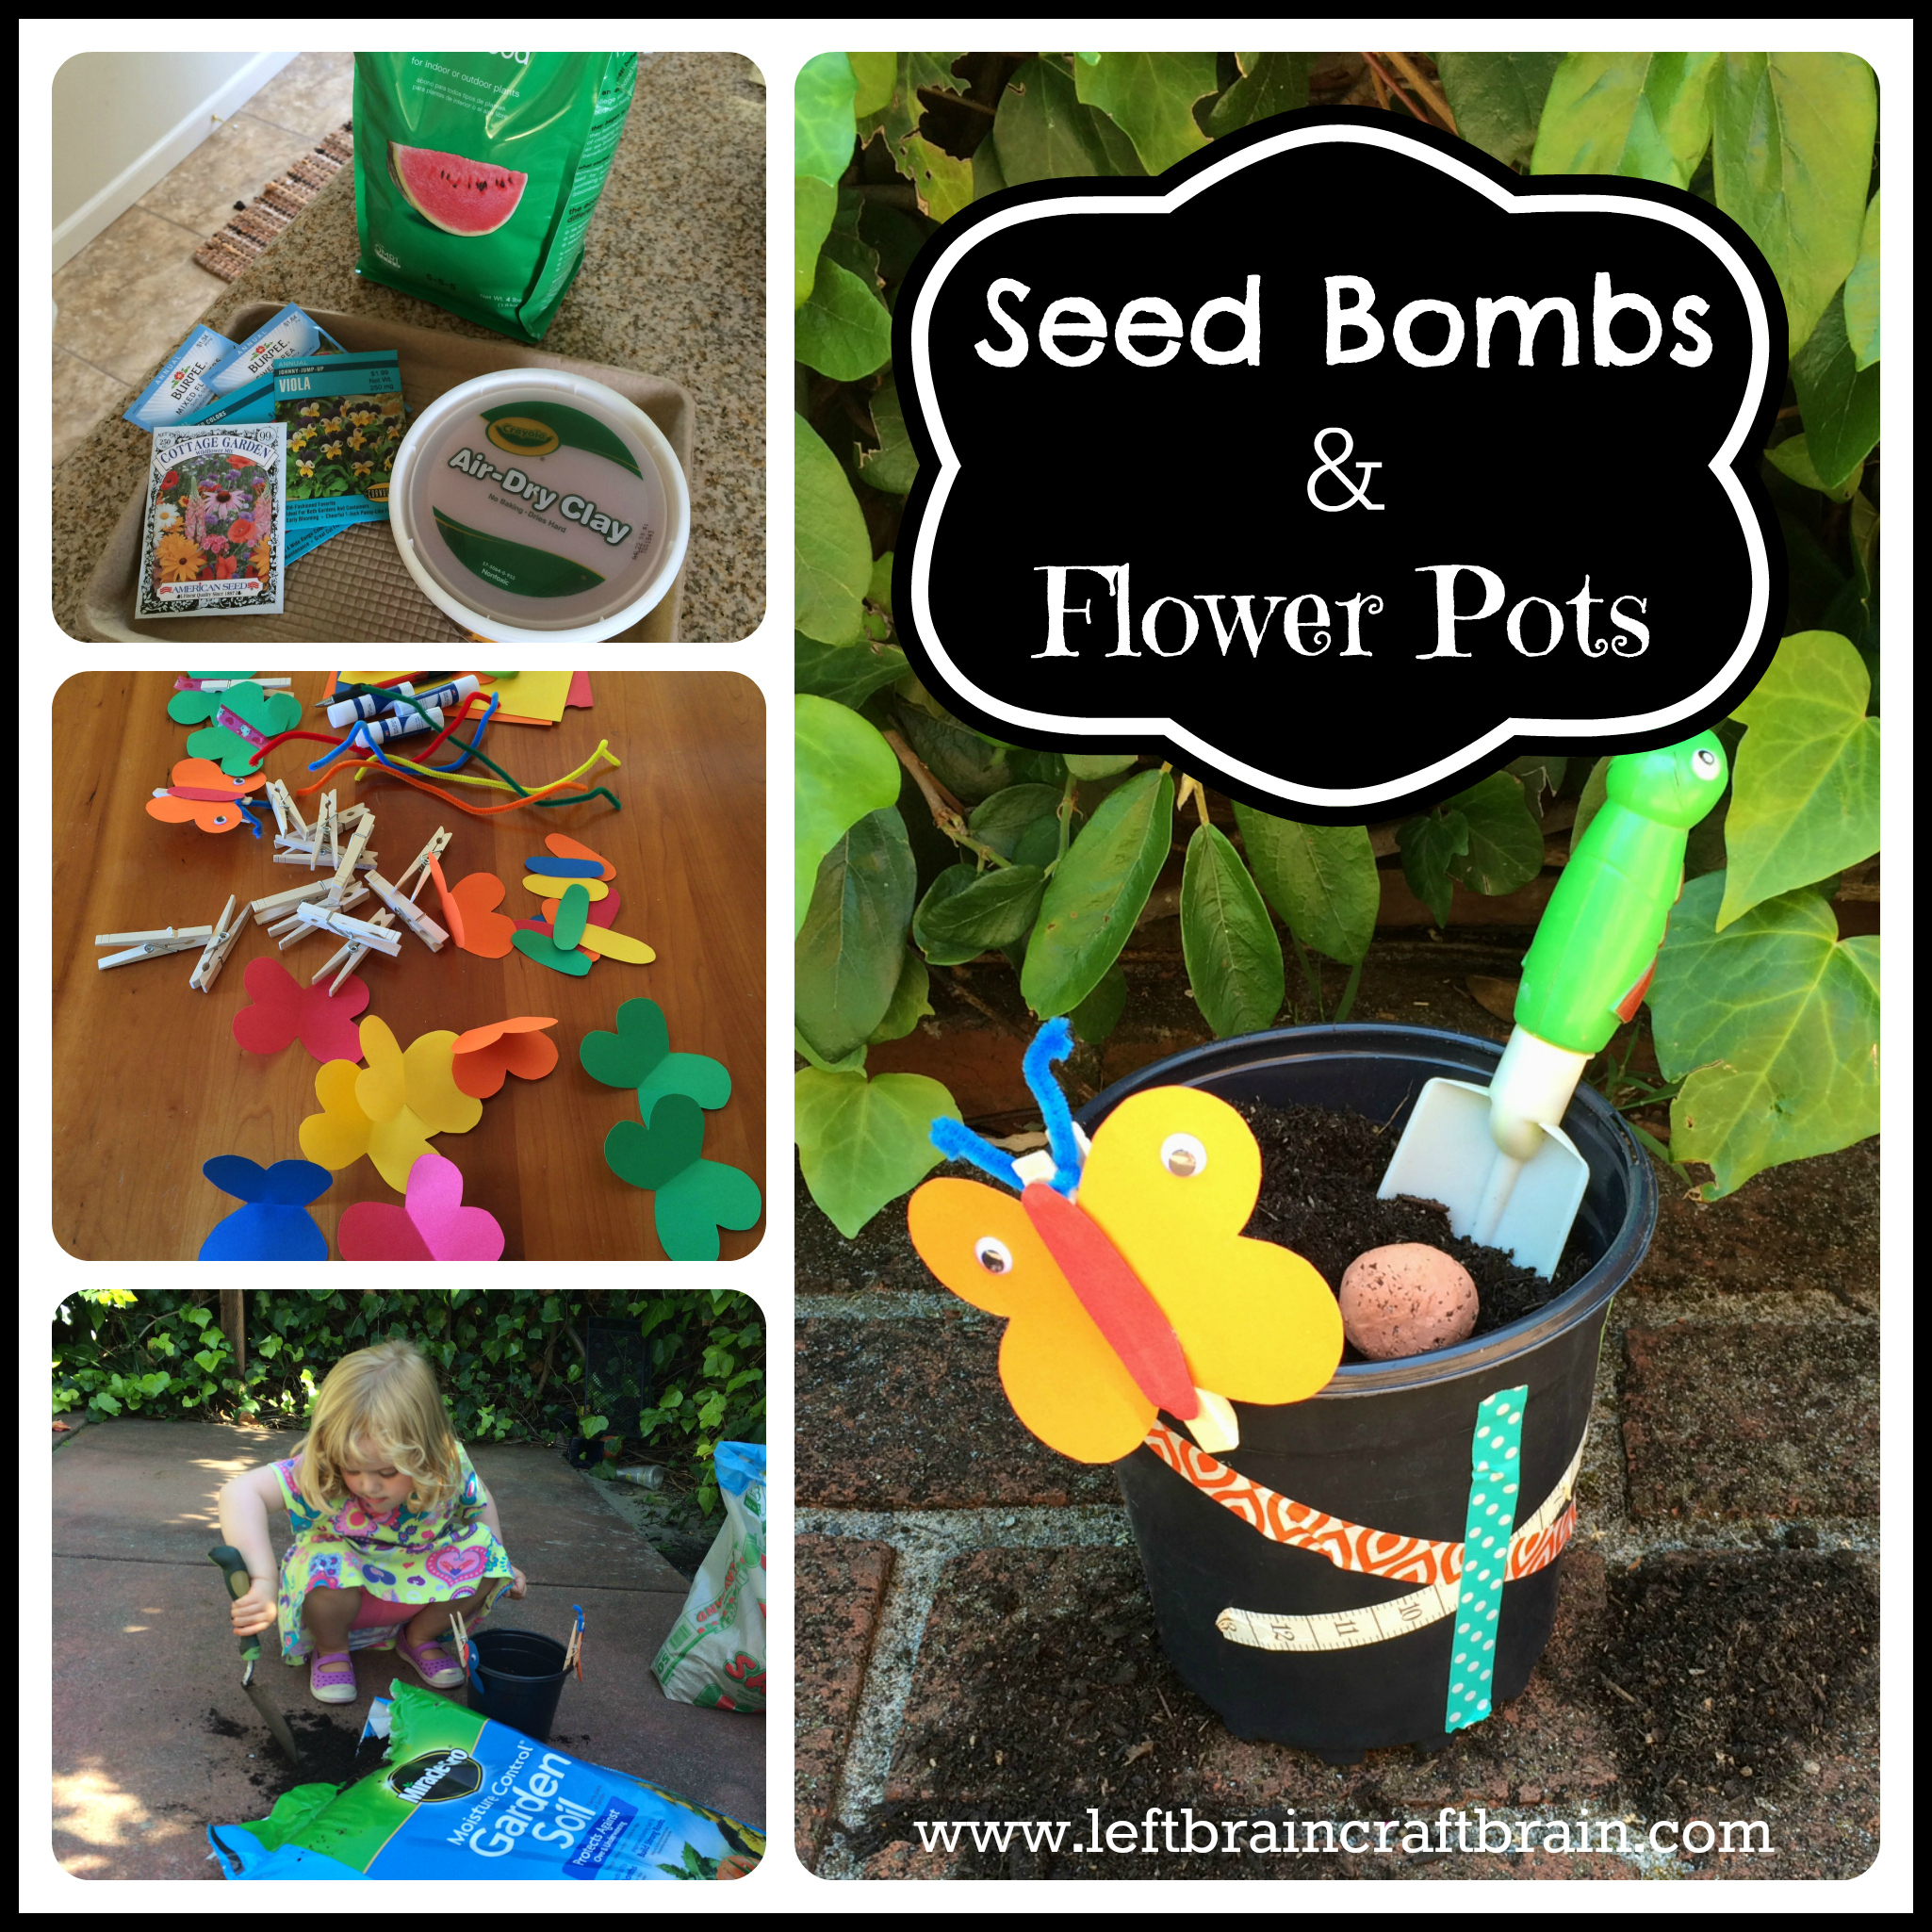 see bombs and flower pots cover